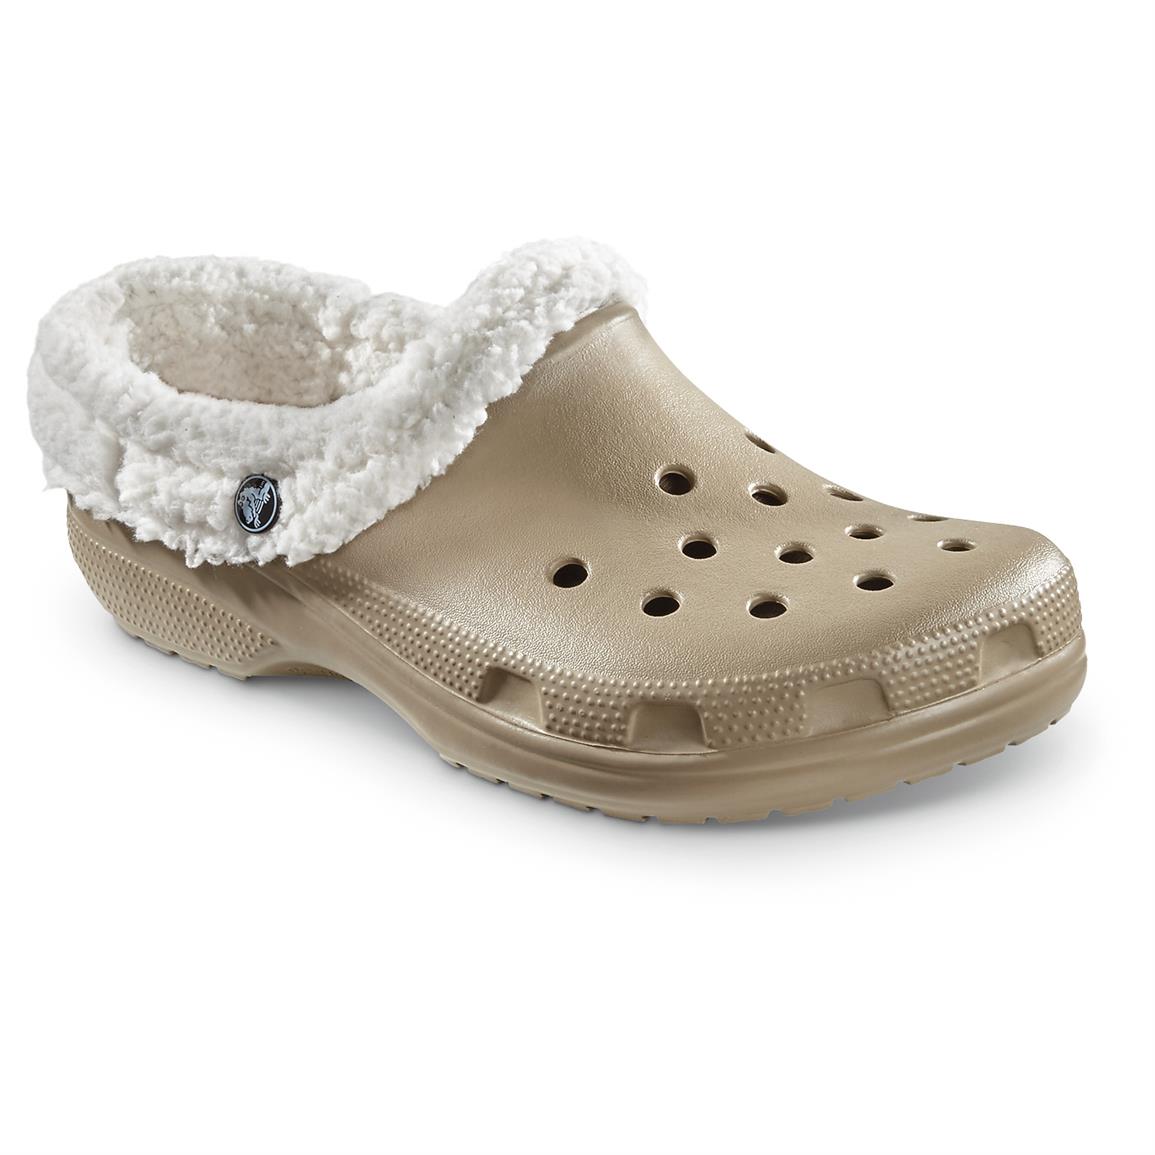  Crocs  Unisex Mammoth Lined Clogs 665562 Casual Shoes at 